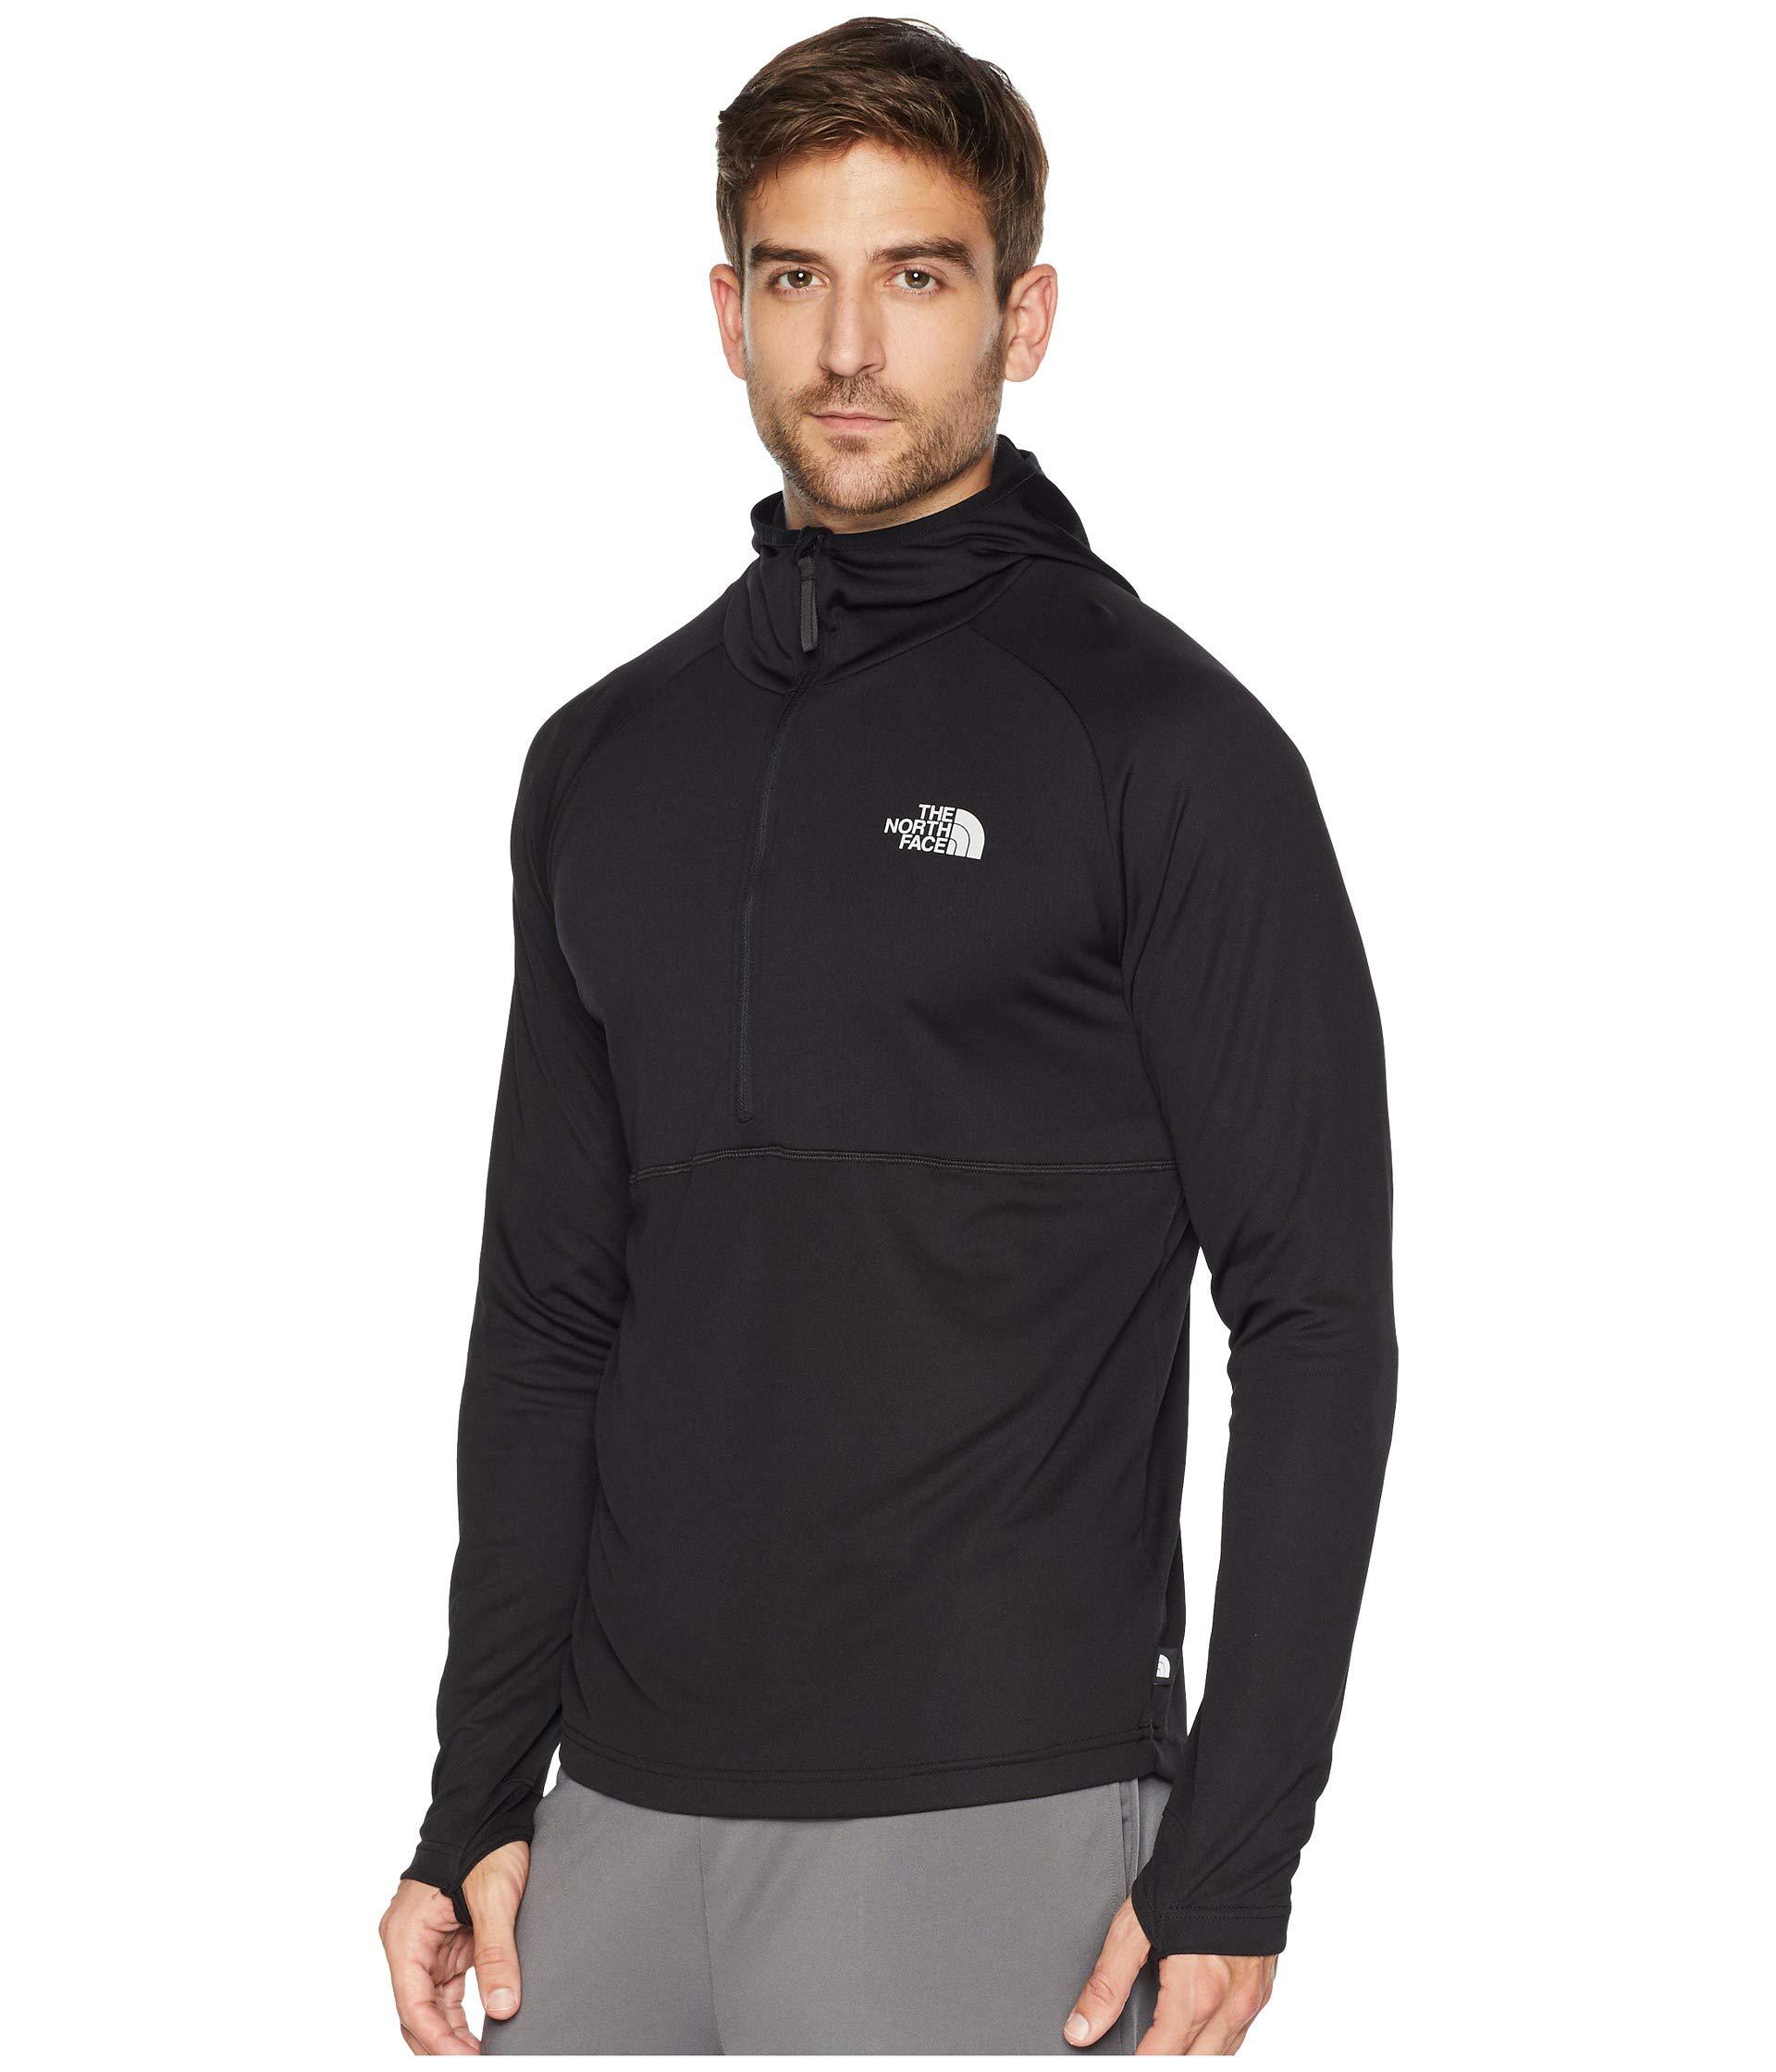 the north face base layer,Free delivery,bobsherwood.net